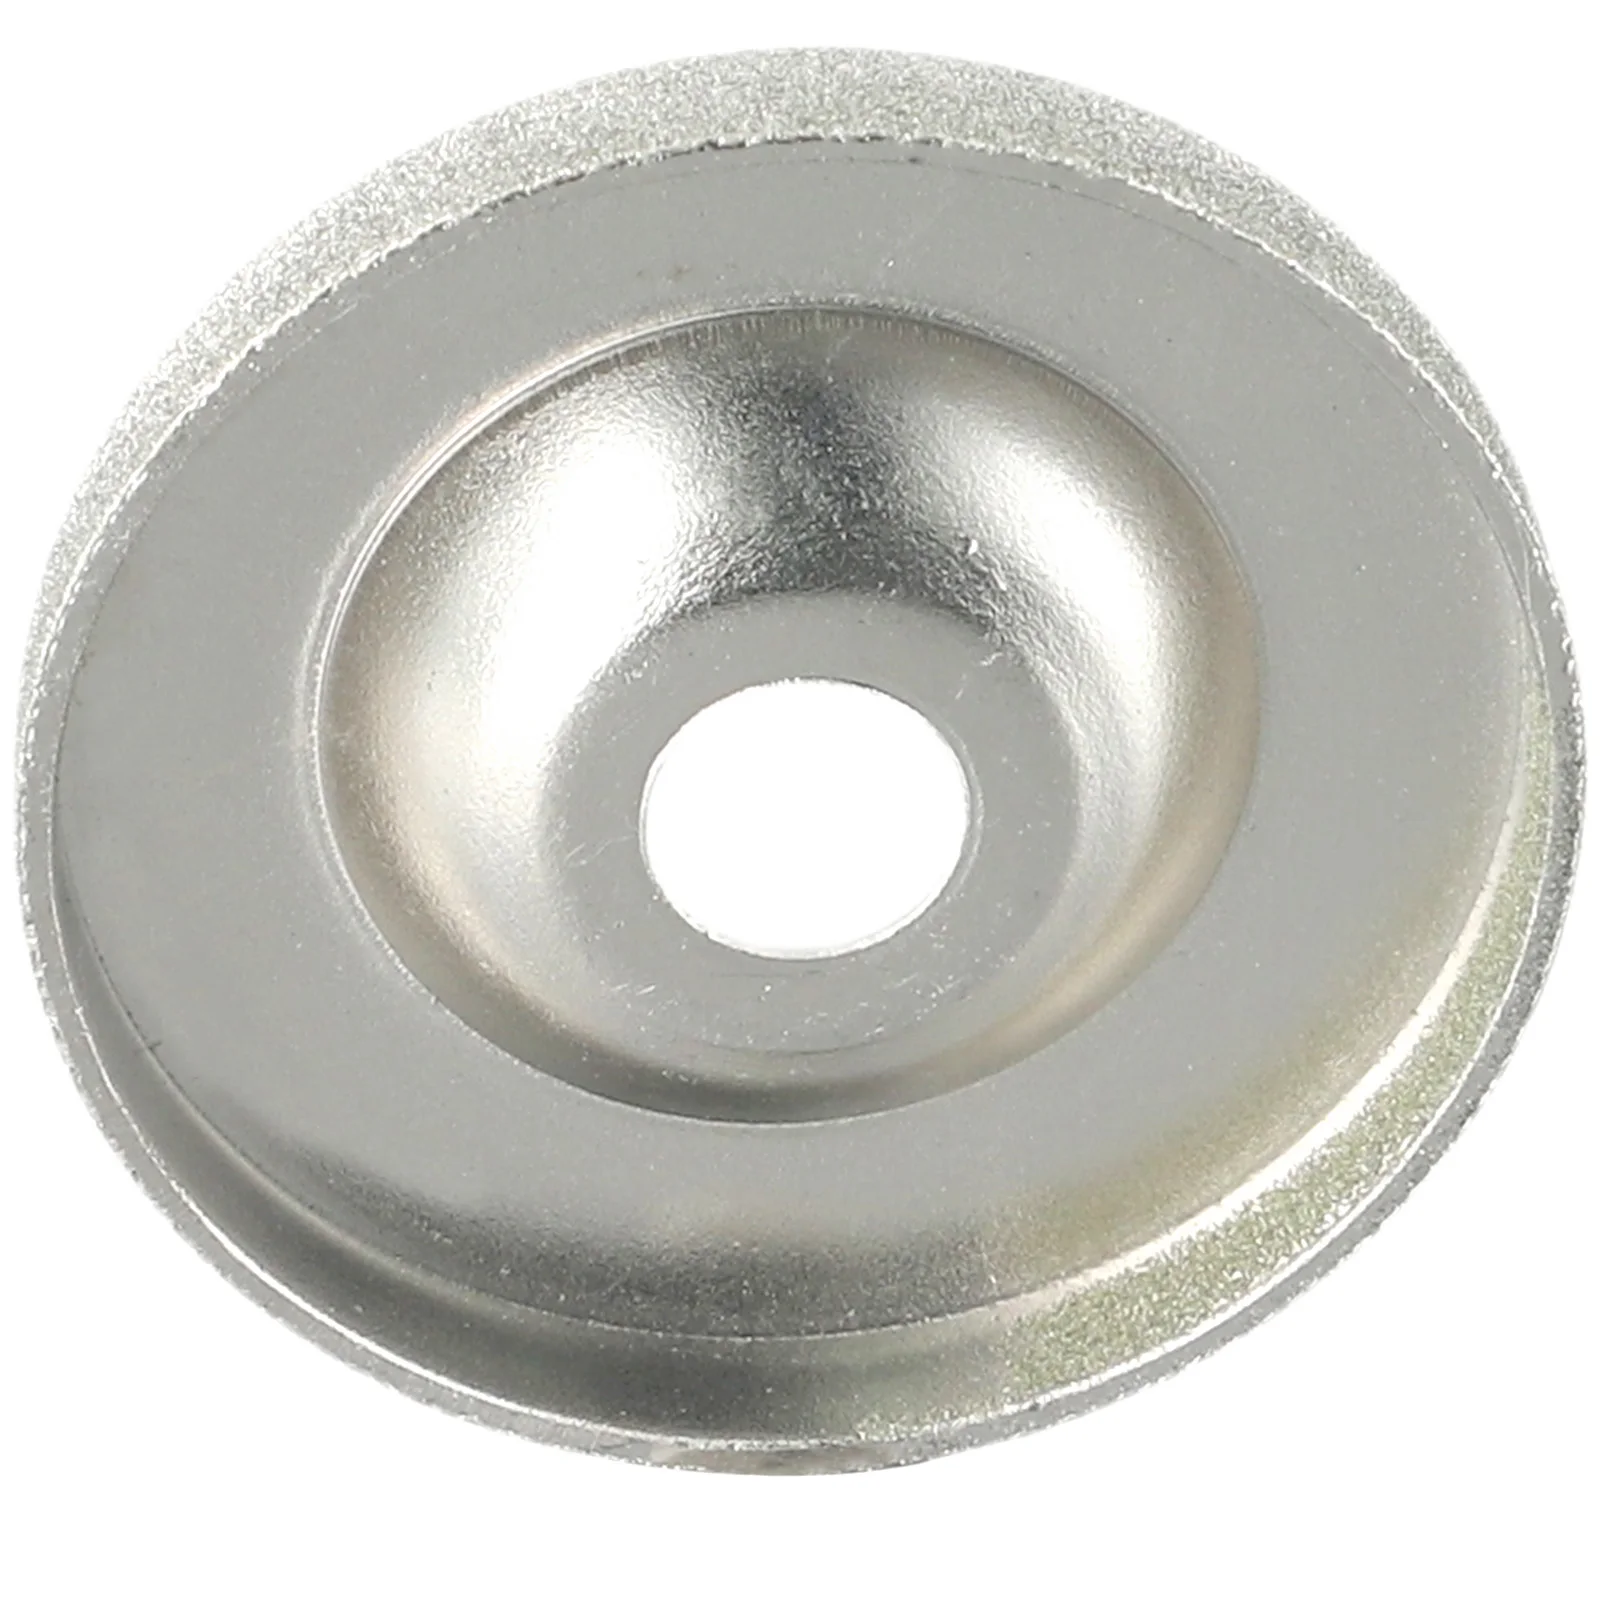 1pc 50mm Diamond Grinding Wheel 180 Grit Grinder Sharpener Angle Cutting Wheel Sharpener 50mm Trimming Rotary Tool 22mm hole with toothed angle grinding wheel woodworking engraving rotary cutting wheel 125mm angle grinder tea tray tool